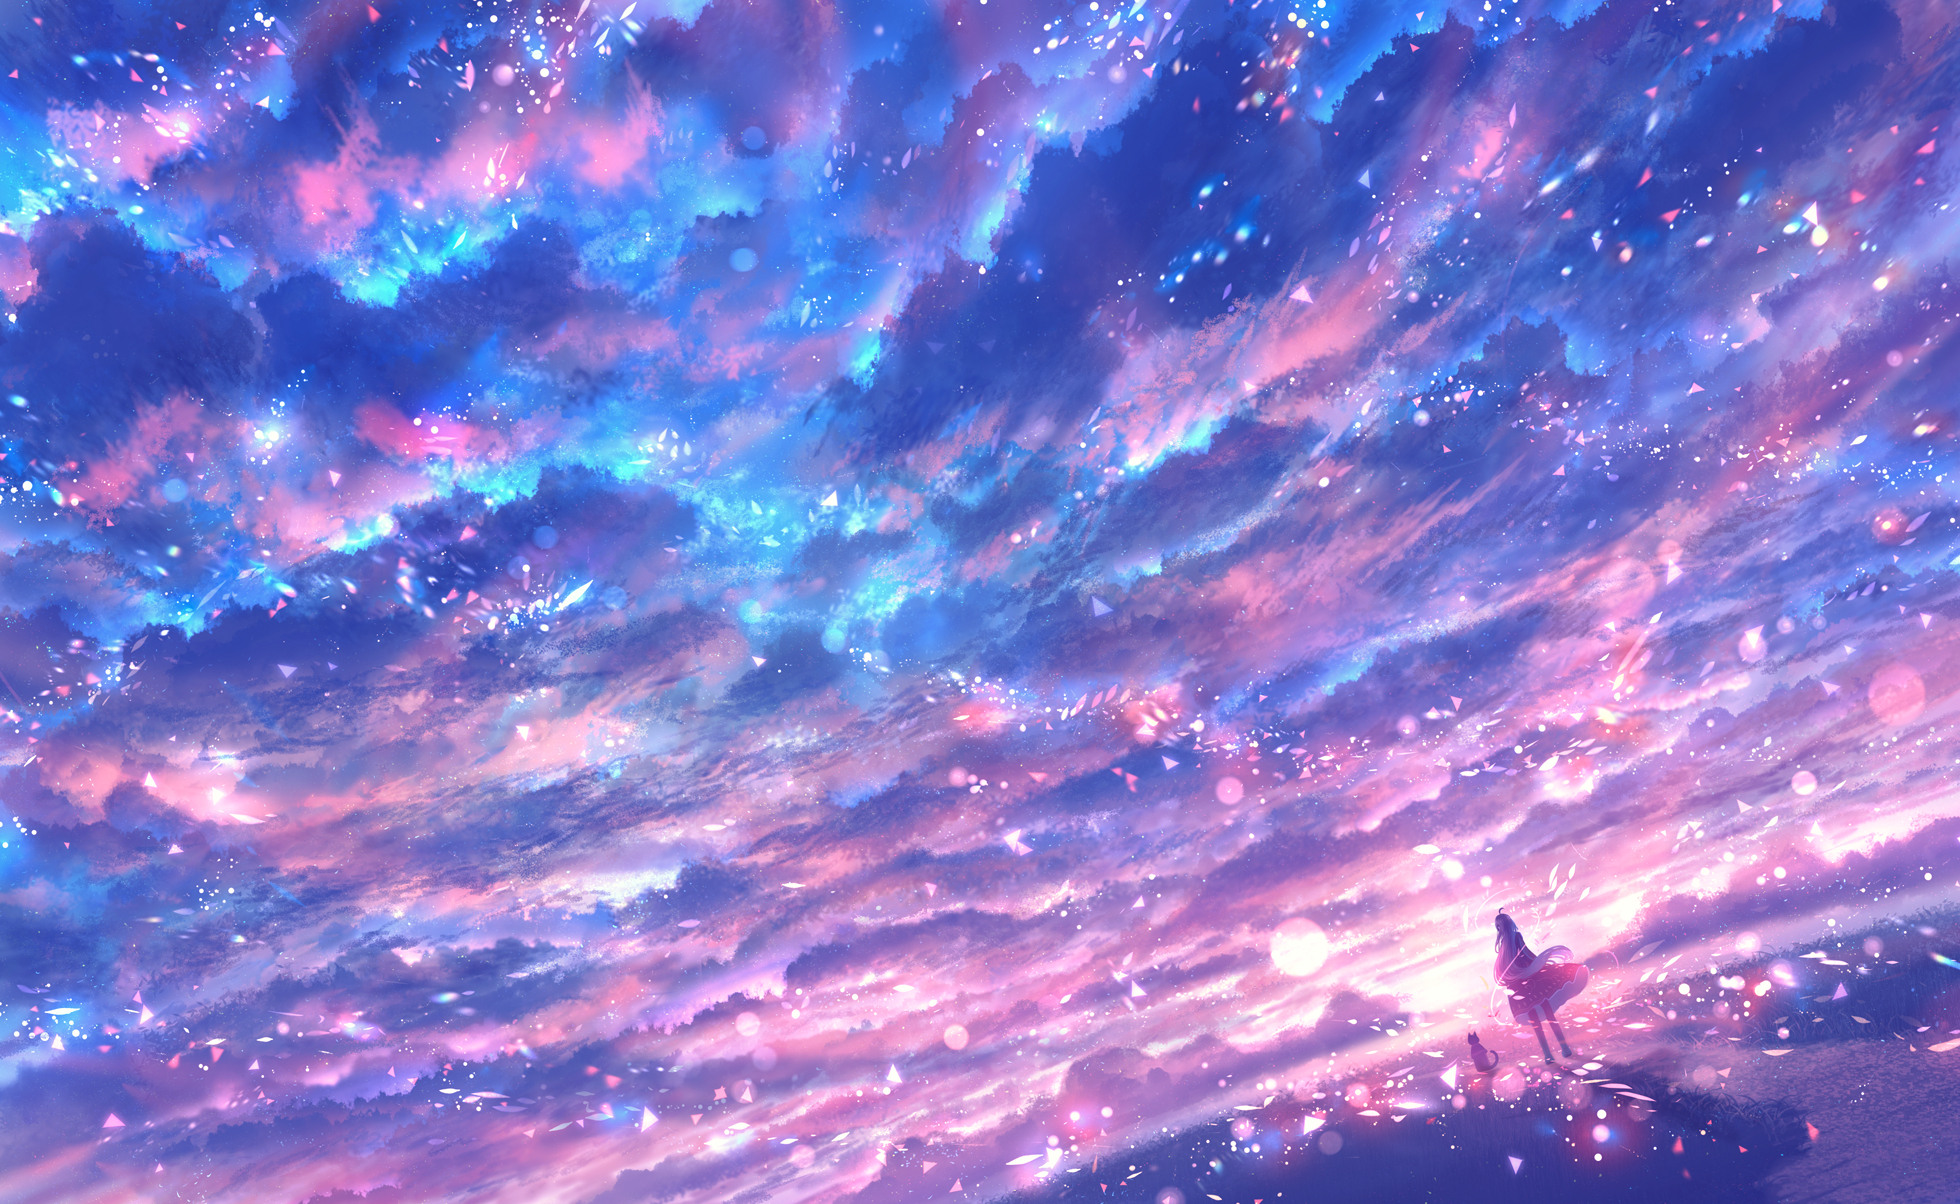 HD wallpaper: anime 4k background for pc, sky, cloud - sky, nature, sunset